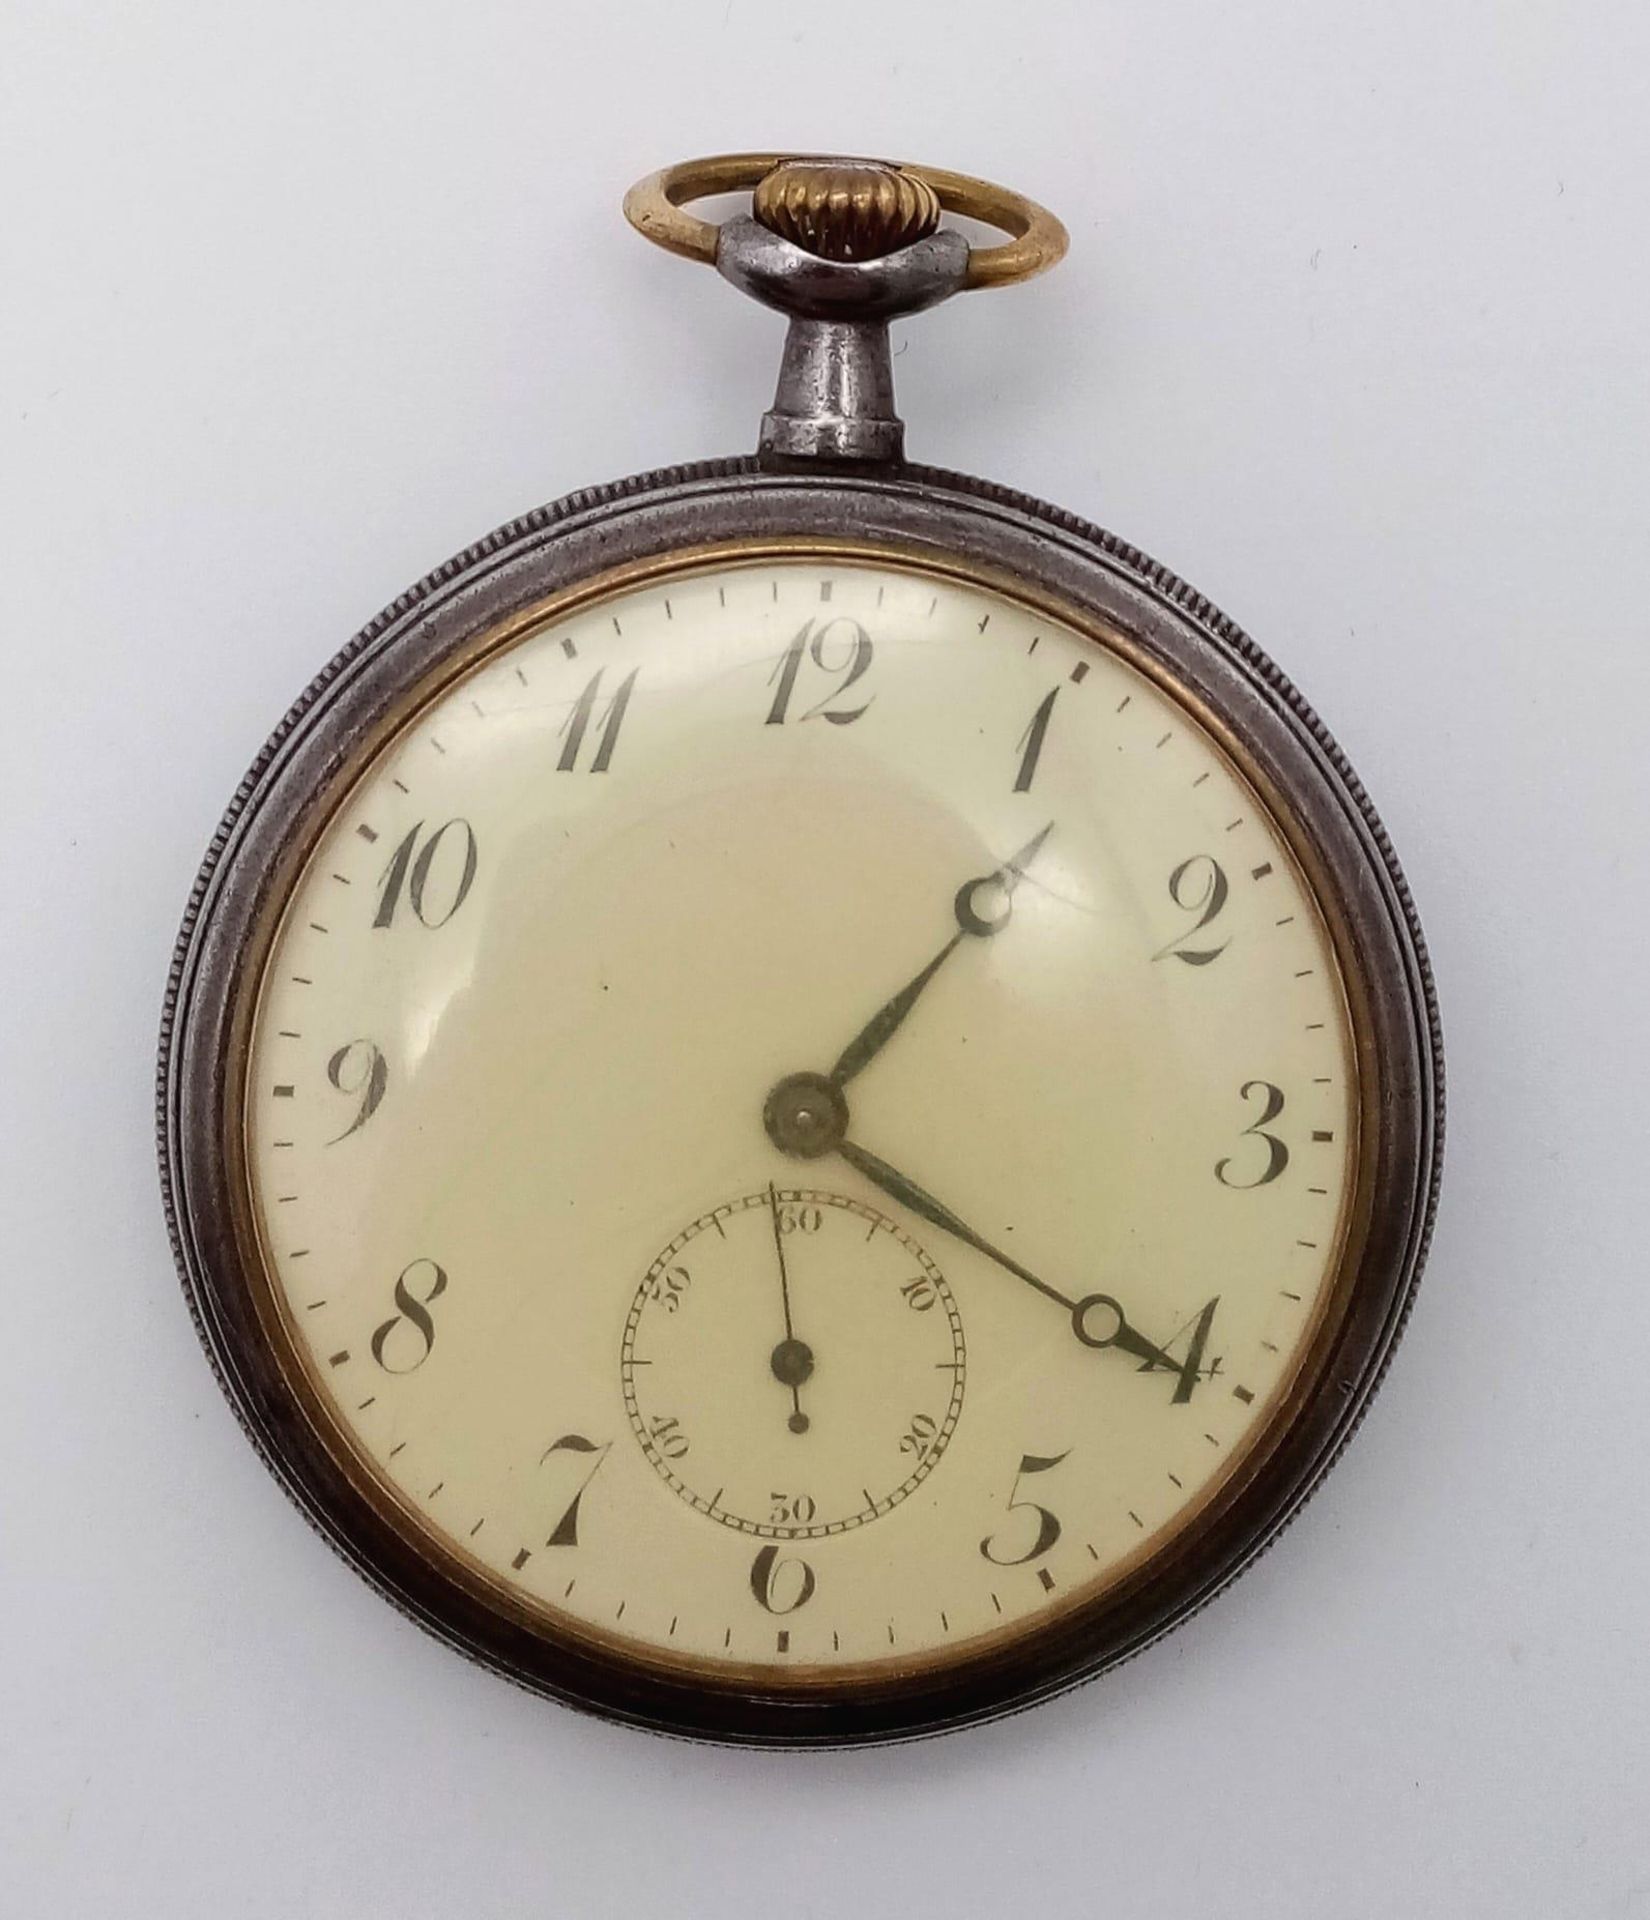 3rd Reich “Brown Shirts” Pocket Watch. 1930’s Swiss Made Pocket Watch with the centre of a SA